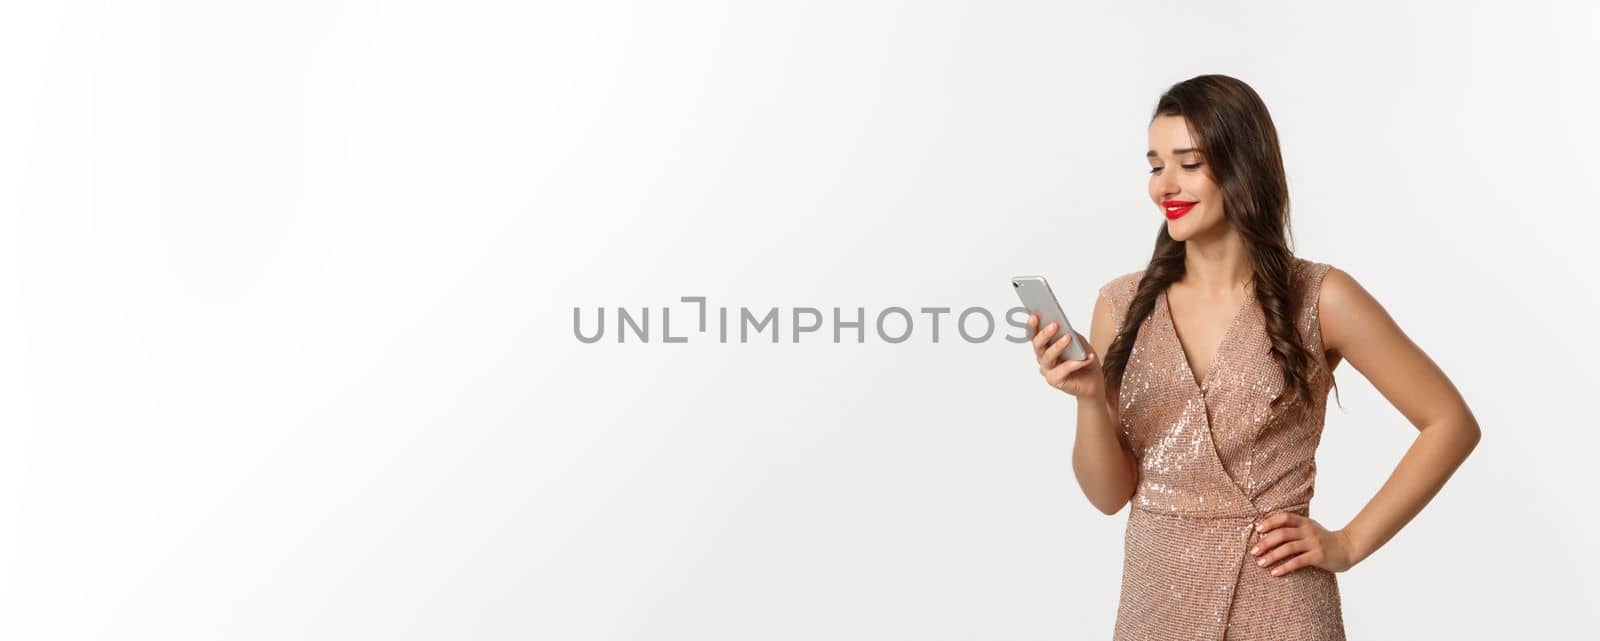 Christmas party and celebration concept. Happy young woman reading message on phone and smiling, using smartphone, wearing luxurious dress, white background.